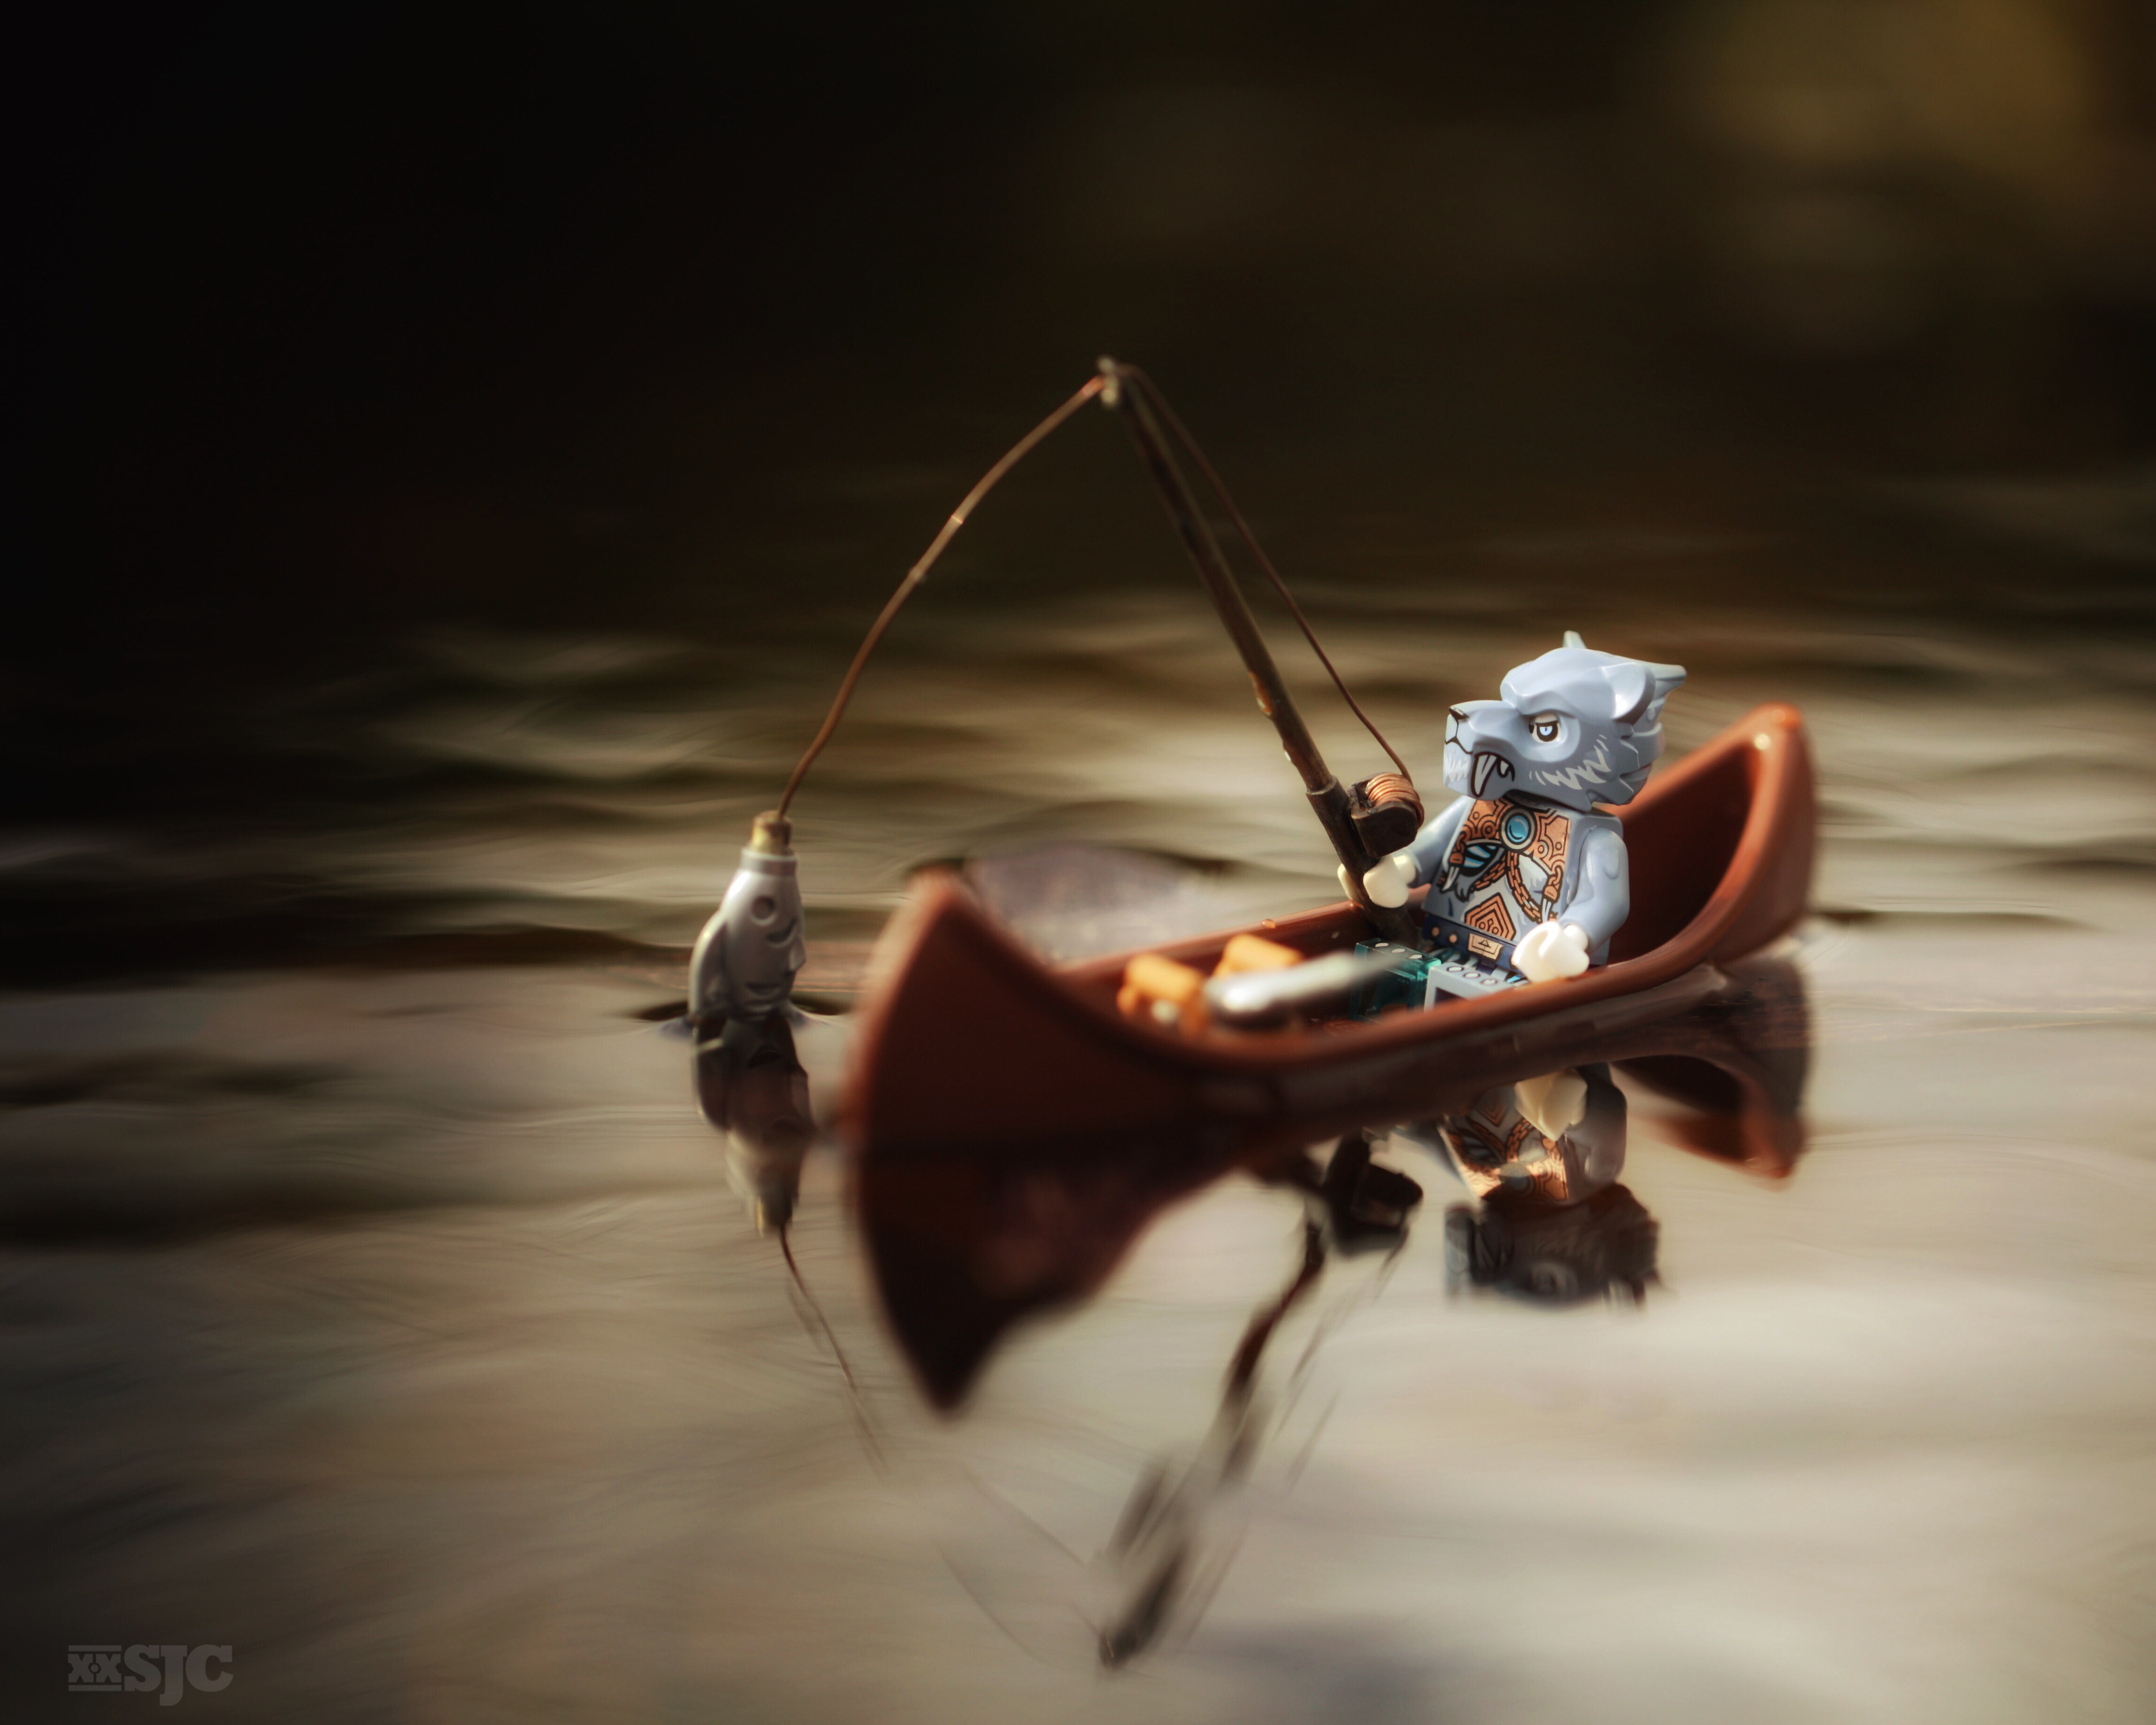 Lego Chima saber tooth tiger fishing in a canoe